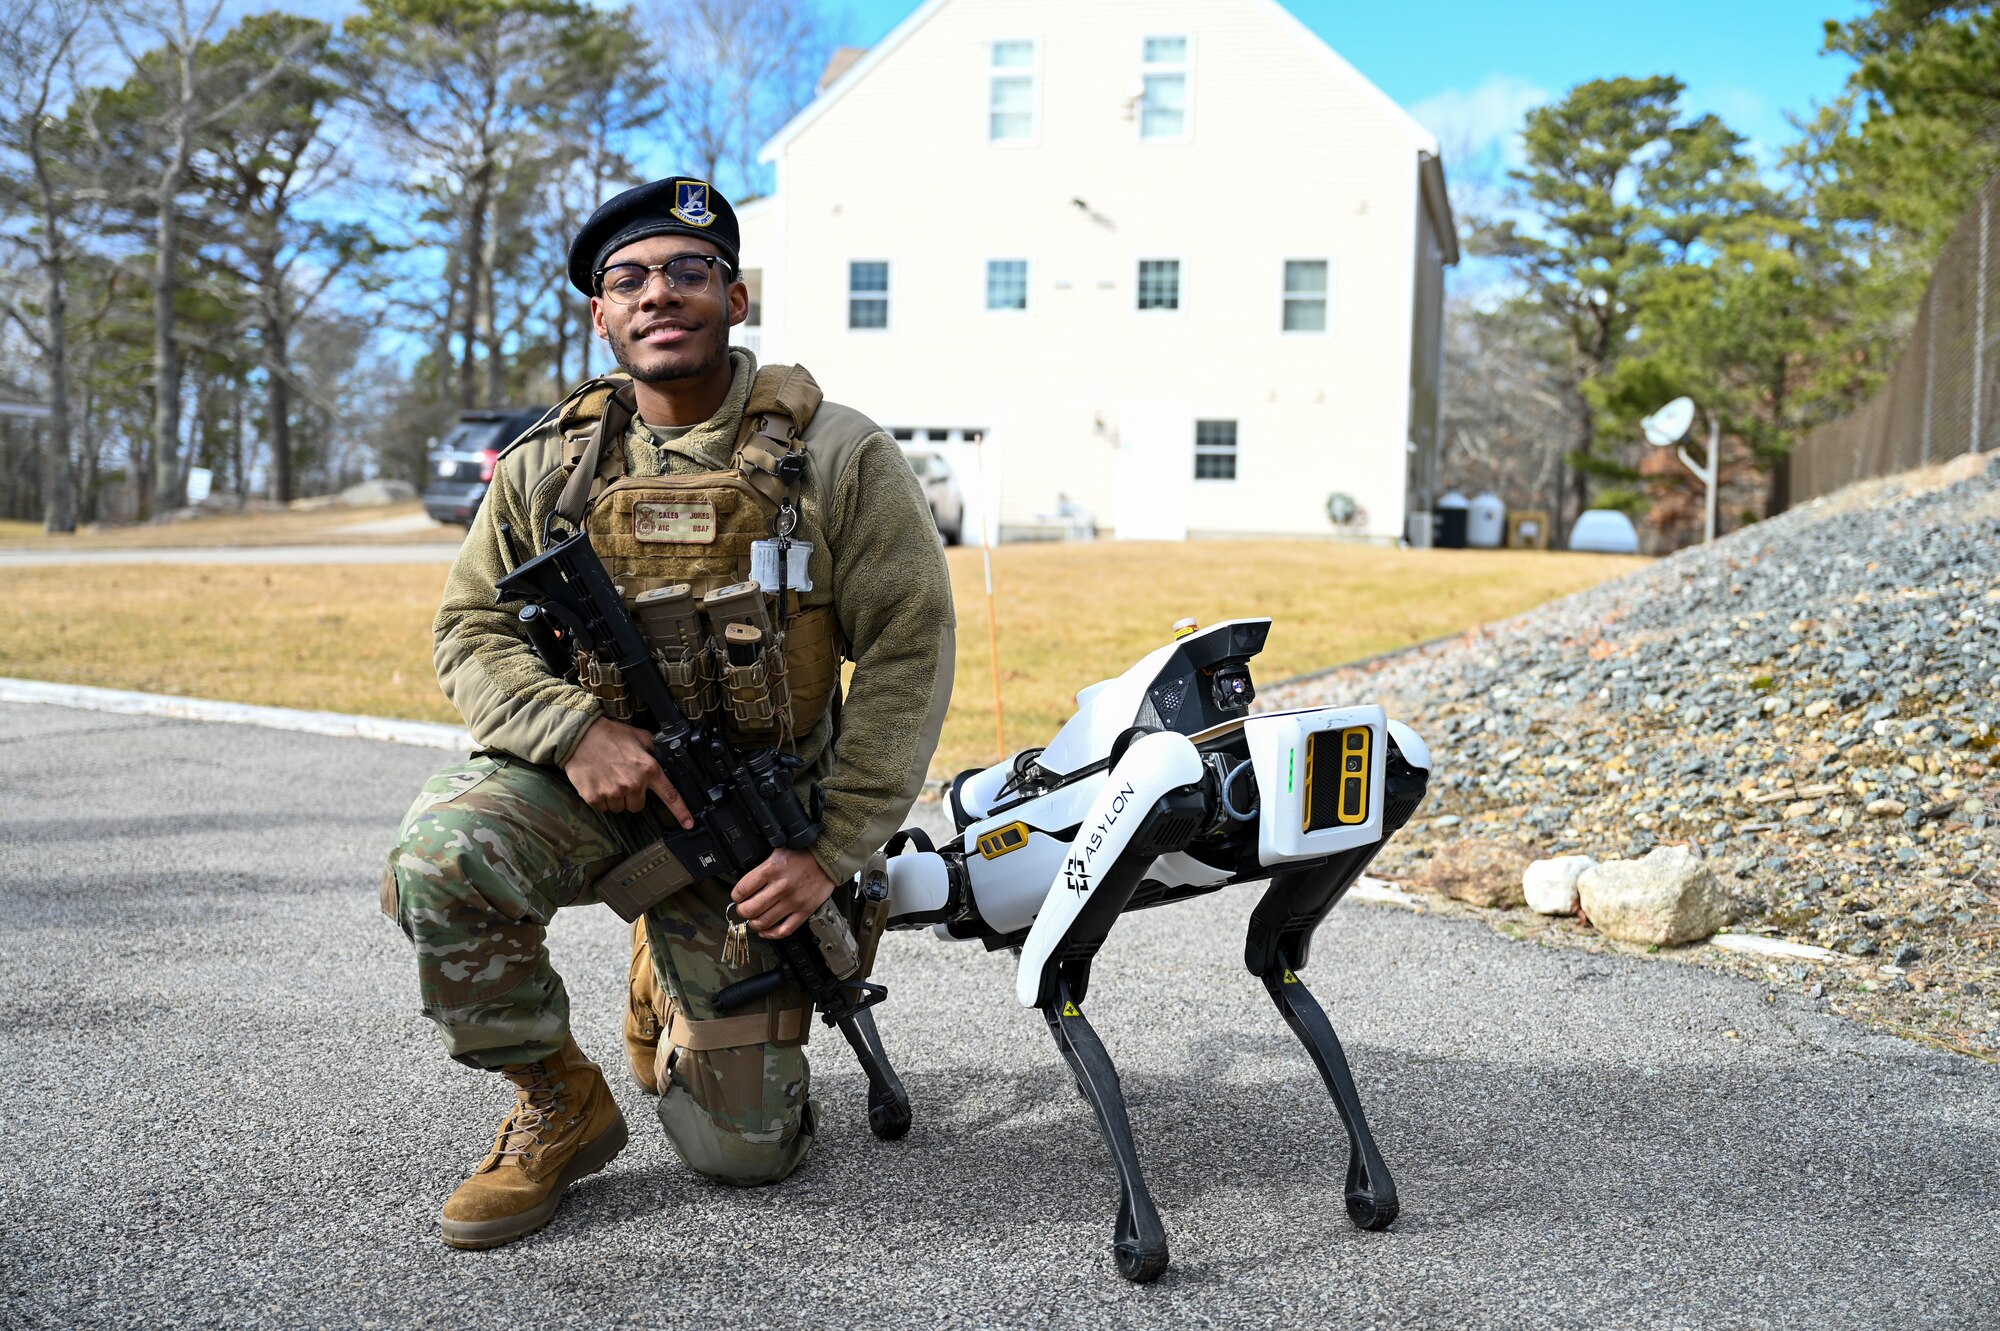 Robotic Dog poses with defender